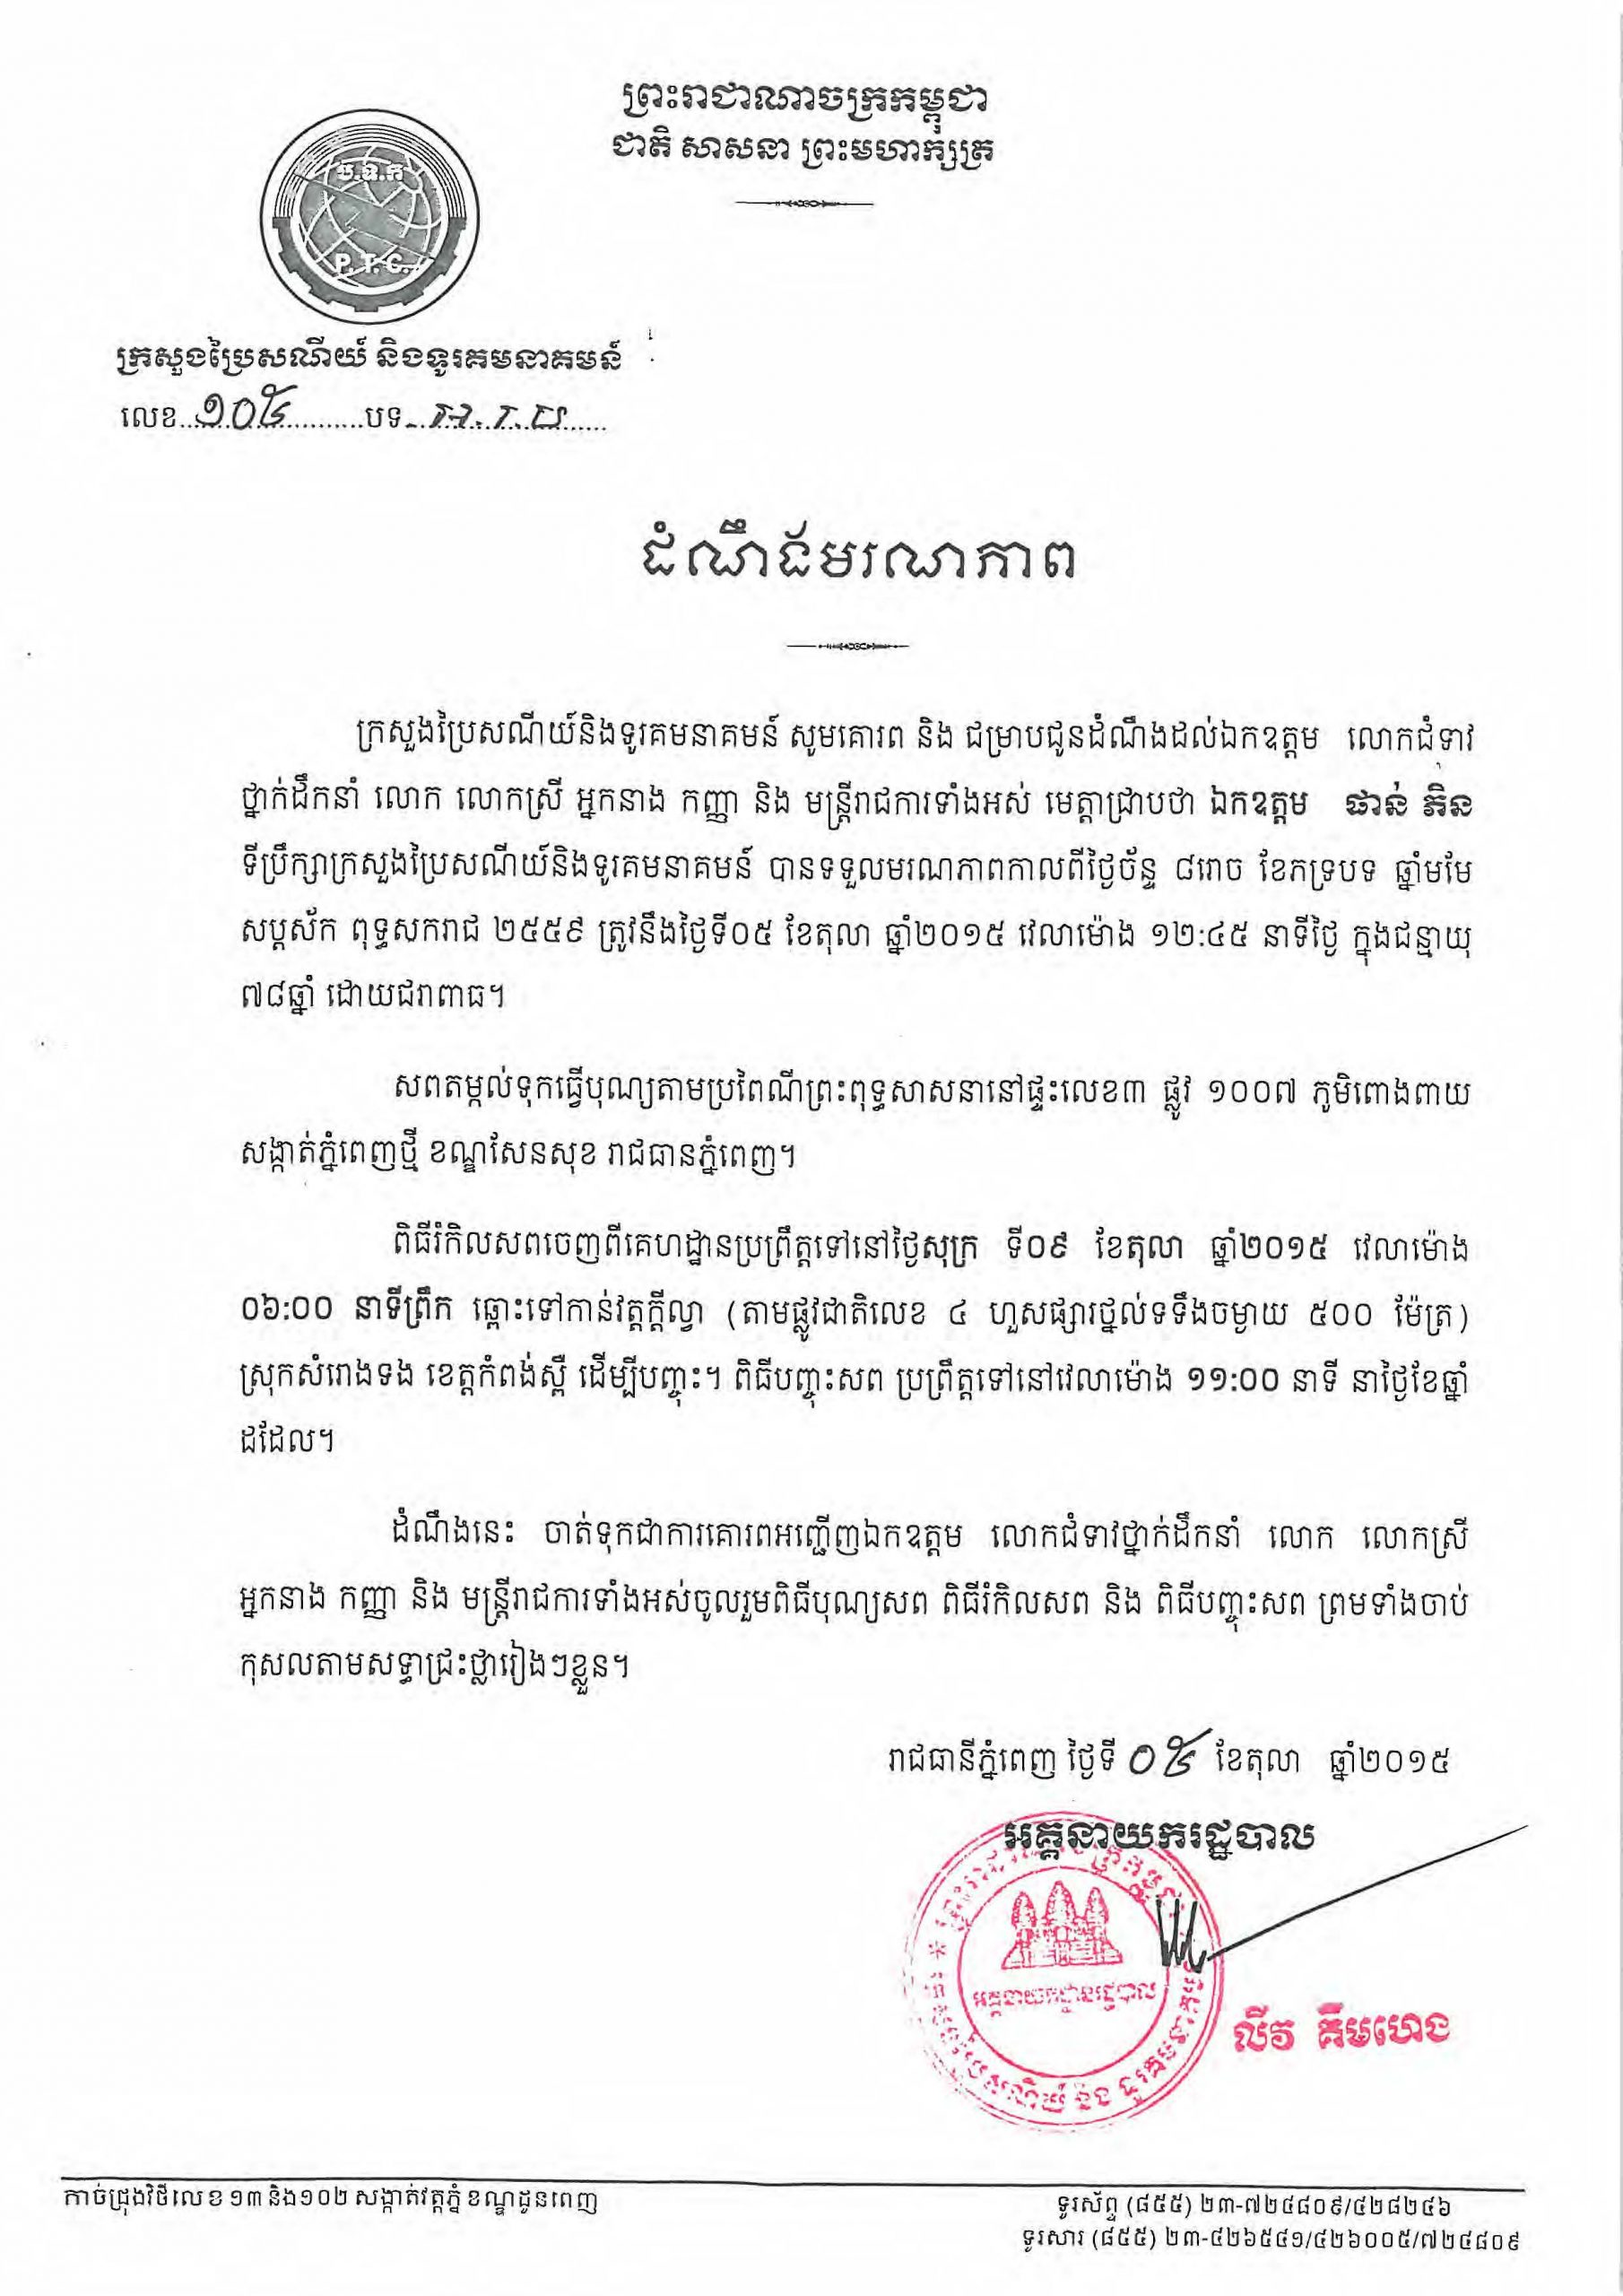 Death Announcement of H.E. Phan Phen, Former Secretary of State of the Ministry of Posts and Telecommunications